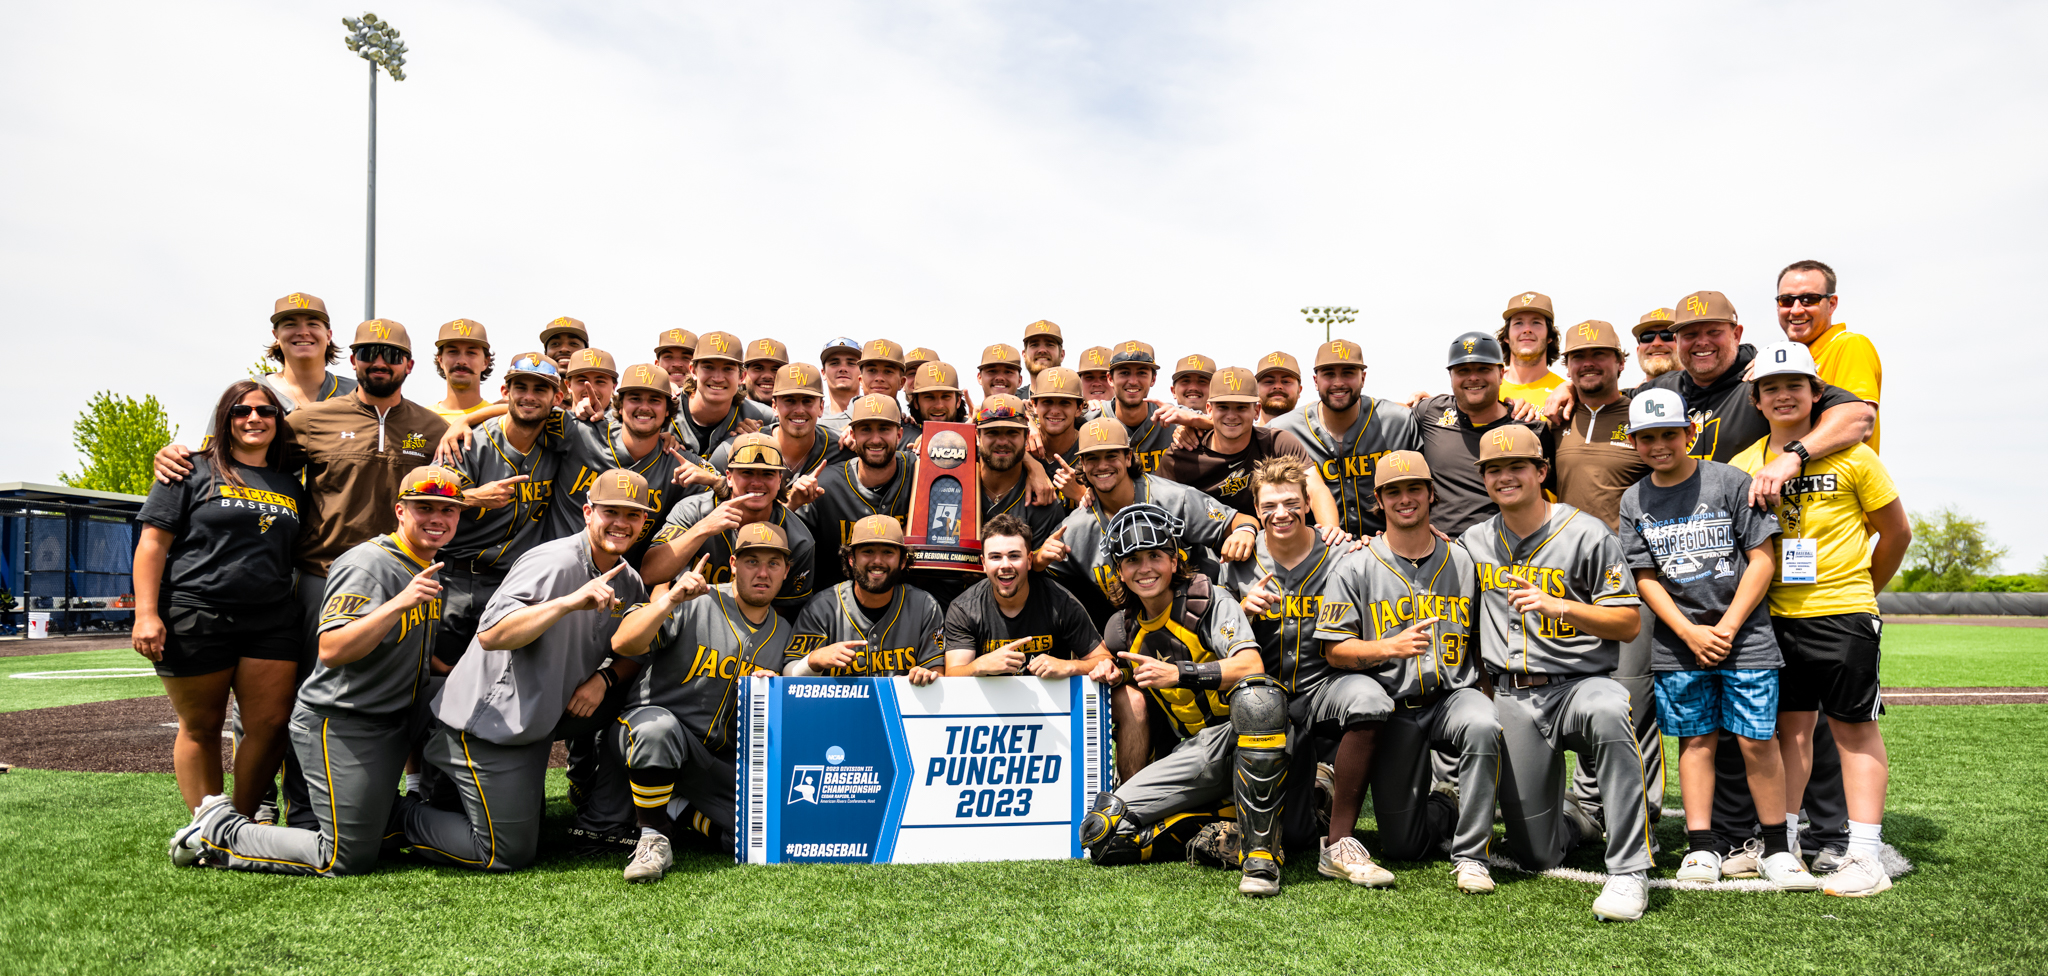 No. 12 Baseball Punches Ticket to World Series with Sweep of Aurora (Ill.)